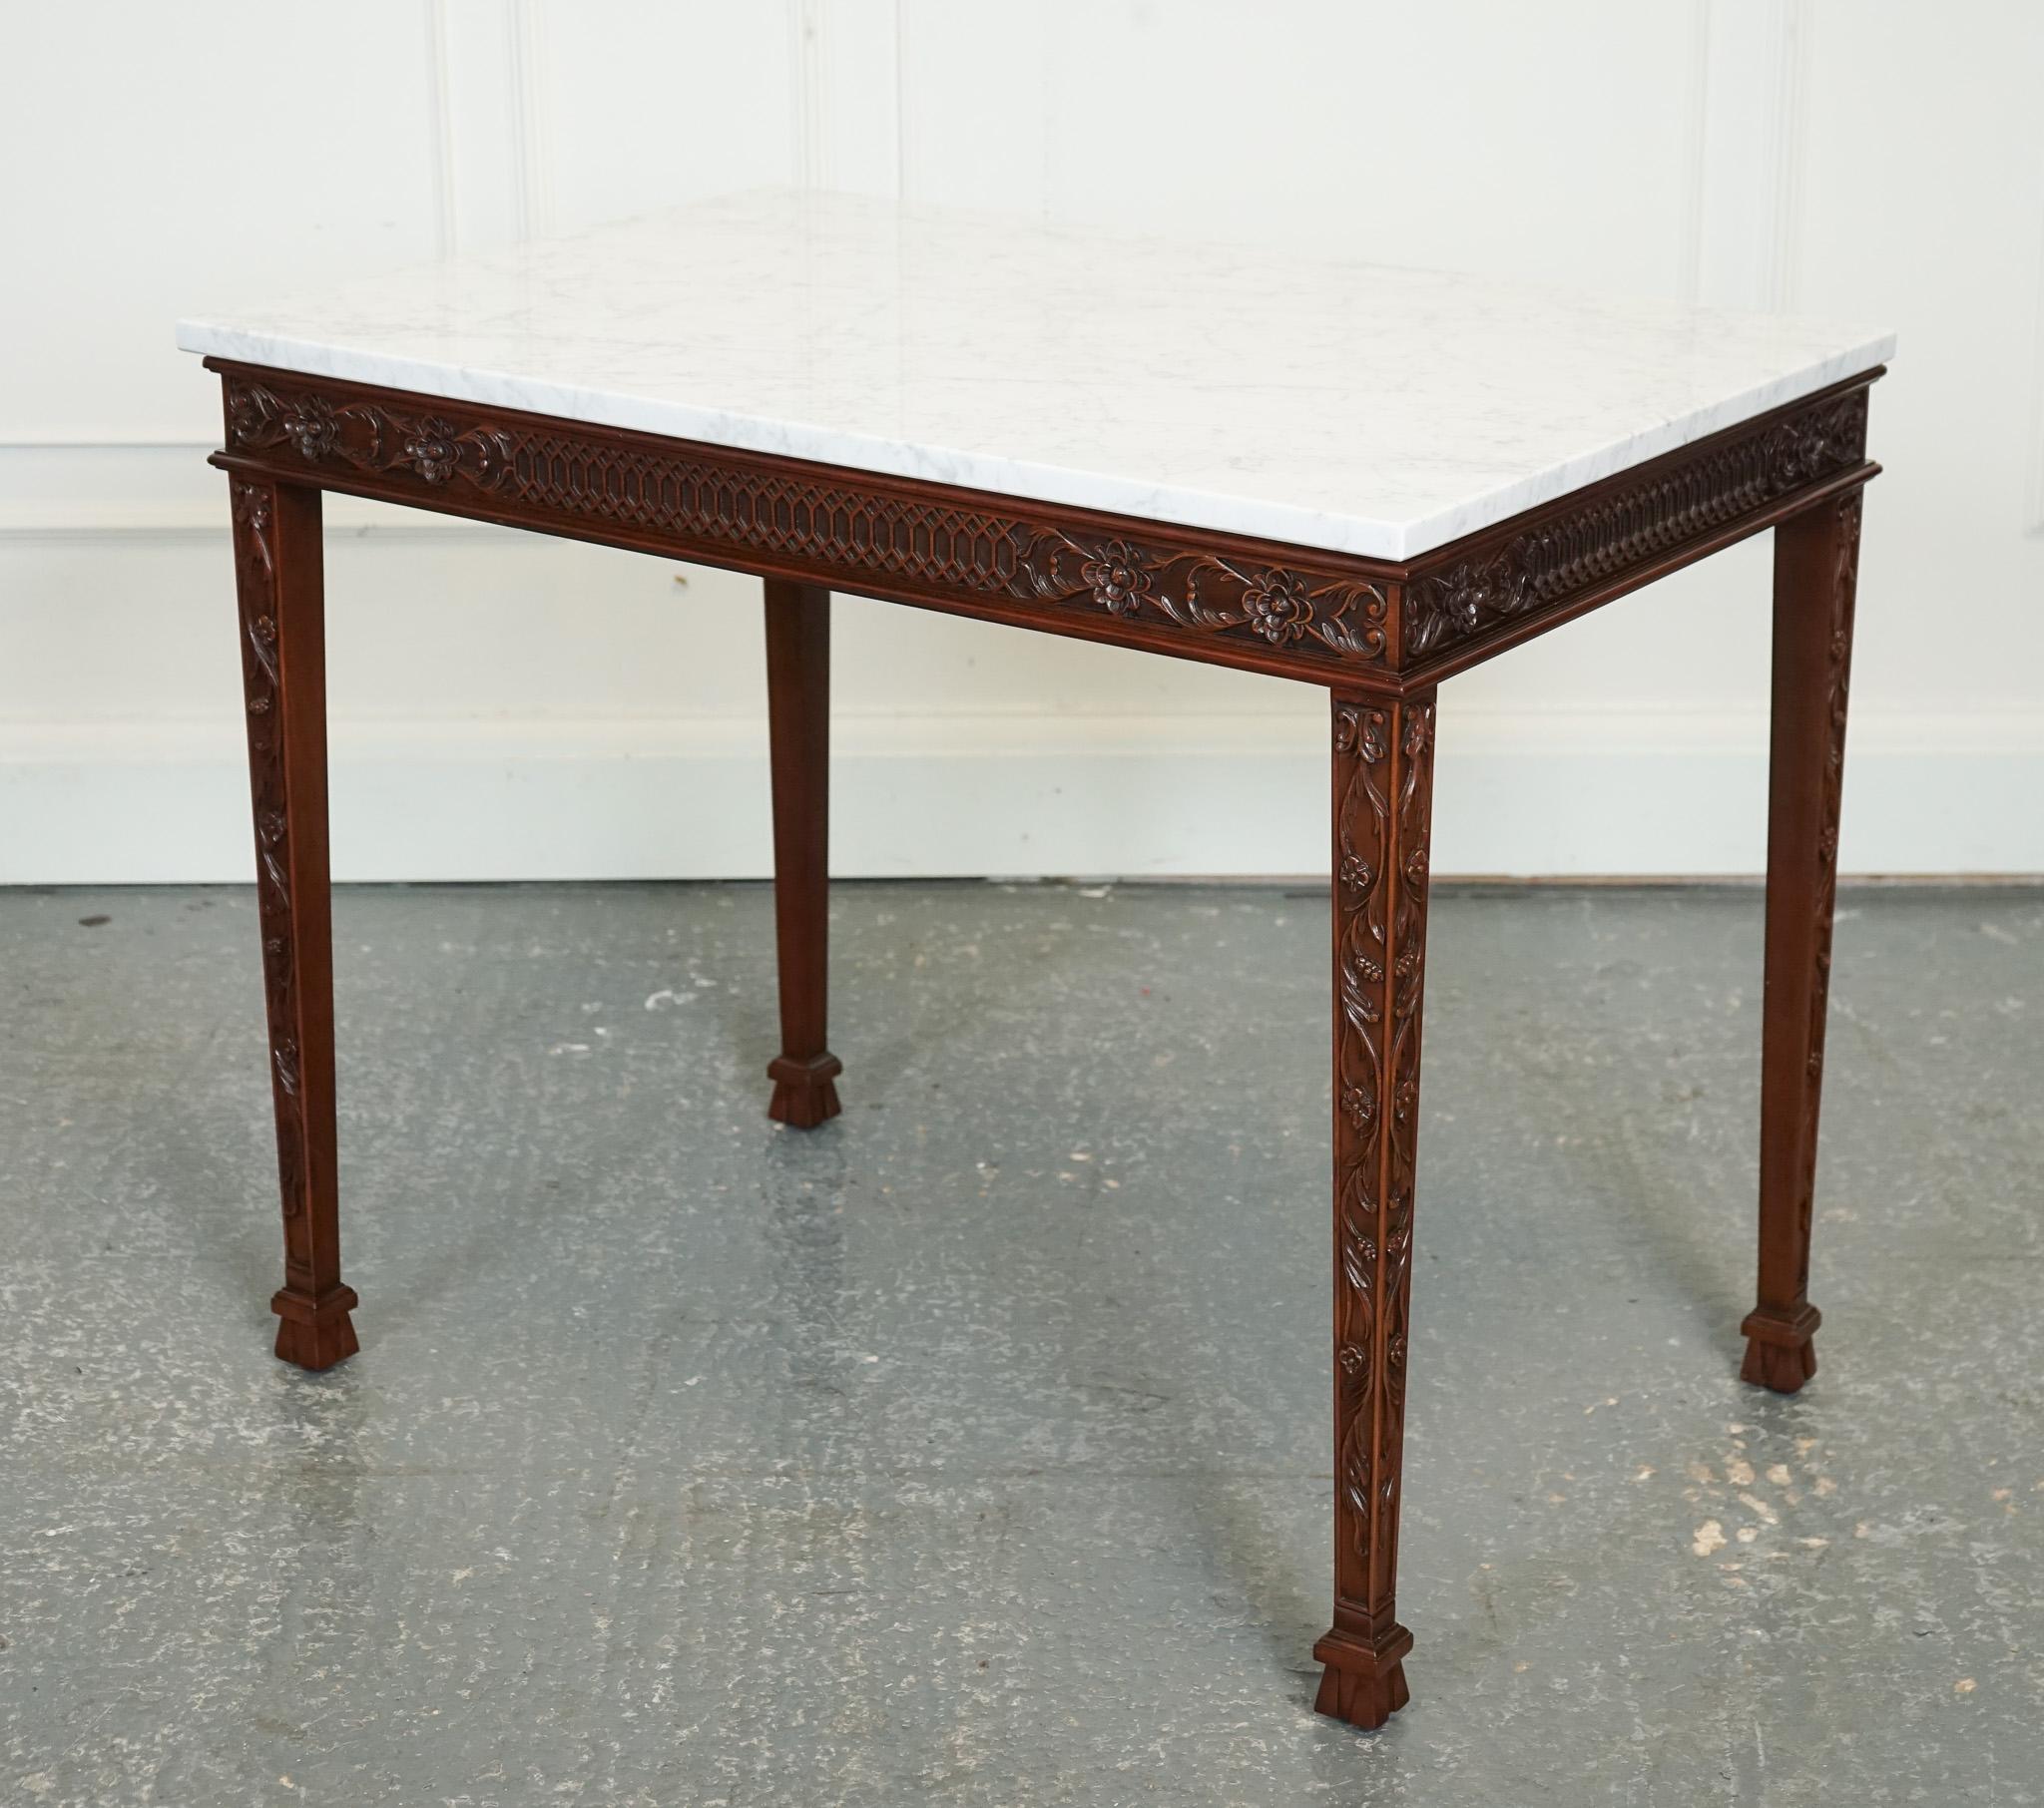 
We are delighted to offer for sale this Pair Of Chippendale Style Console Tables White Carrara Marble.

A pair of Chippendale style console tables with white Carrara marble tops is a stunning addition to any home. These tables are meticulously